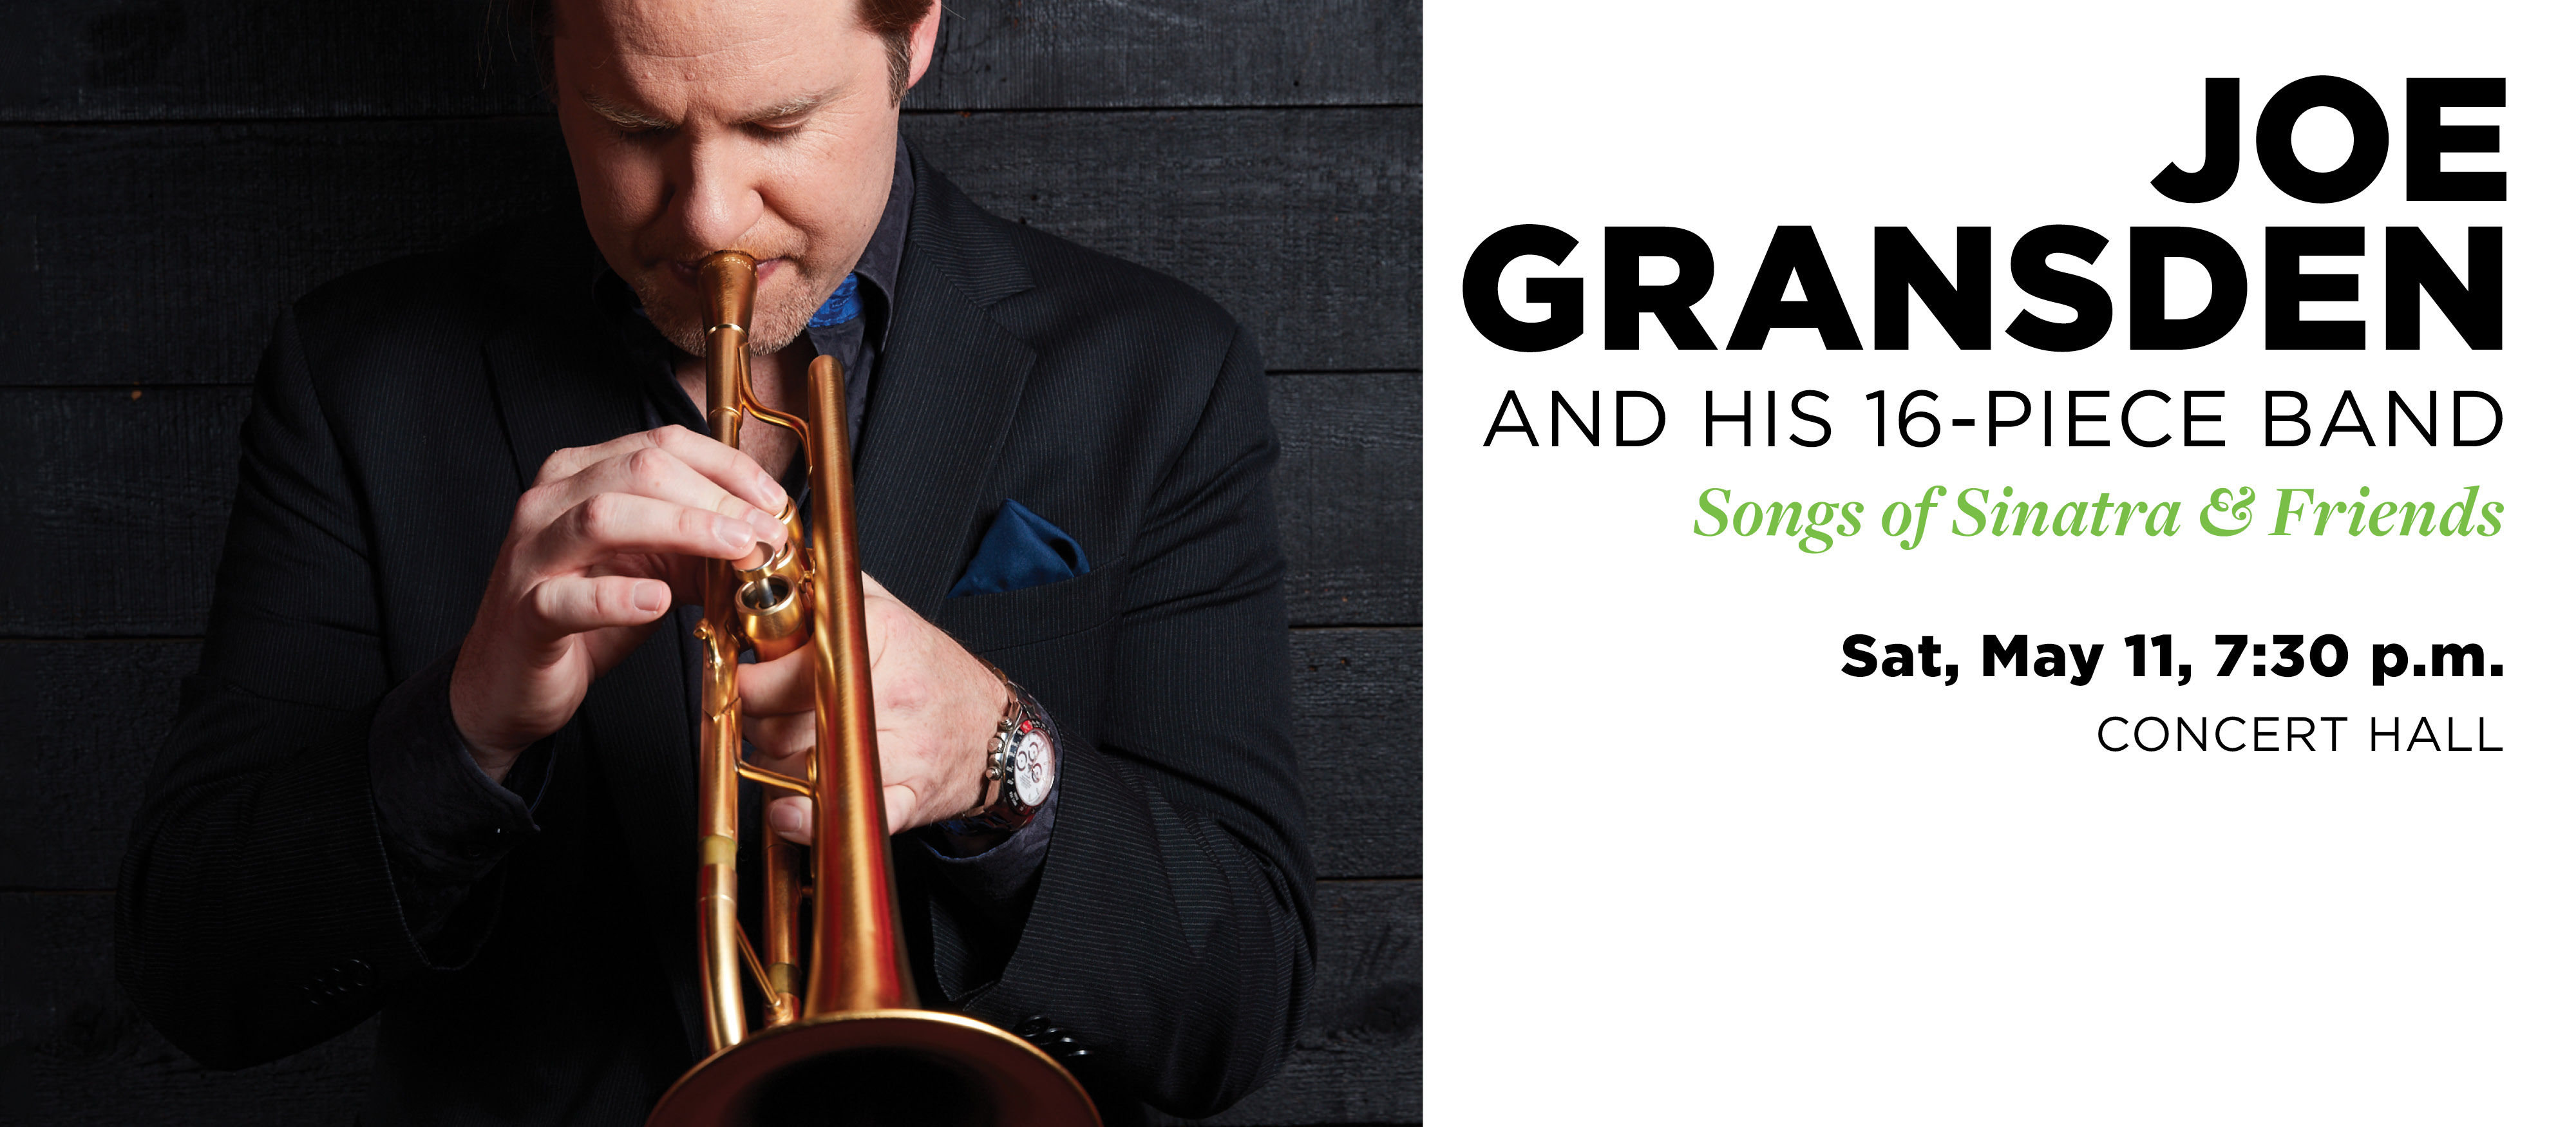 Joe Gransden And His 16-Piece Band: Songs of Sinatra & Friends | Sat, May 11, 7:30 p.m. | Concert Hall